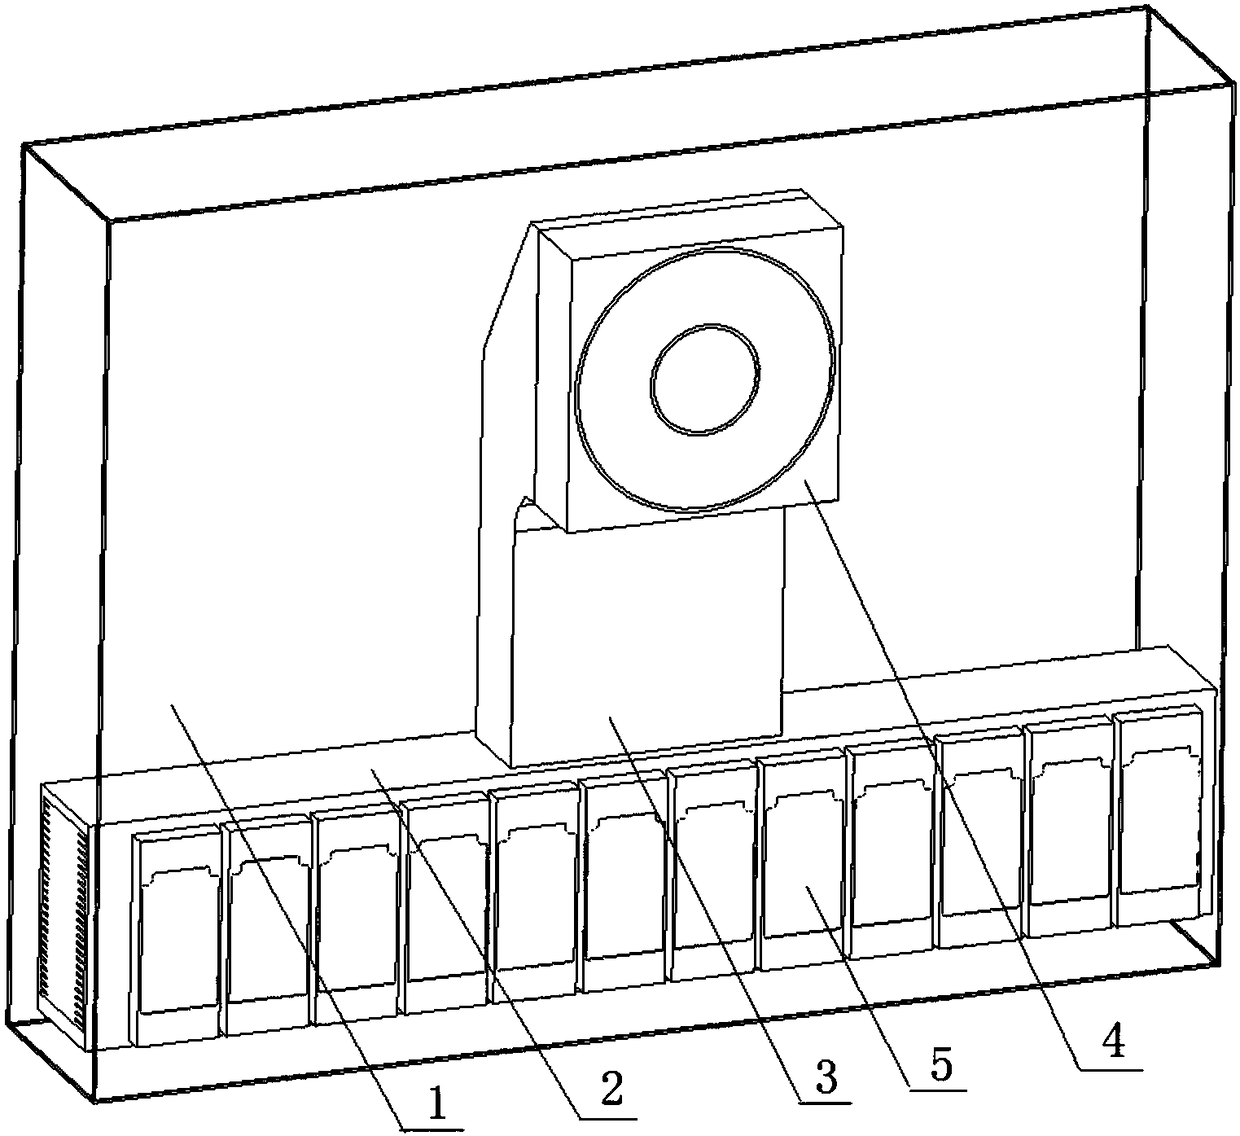 A T-shaped air duct cooling device using trapezoidal cooling fins